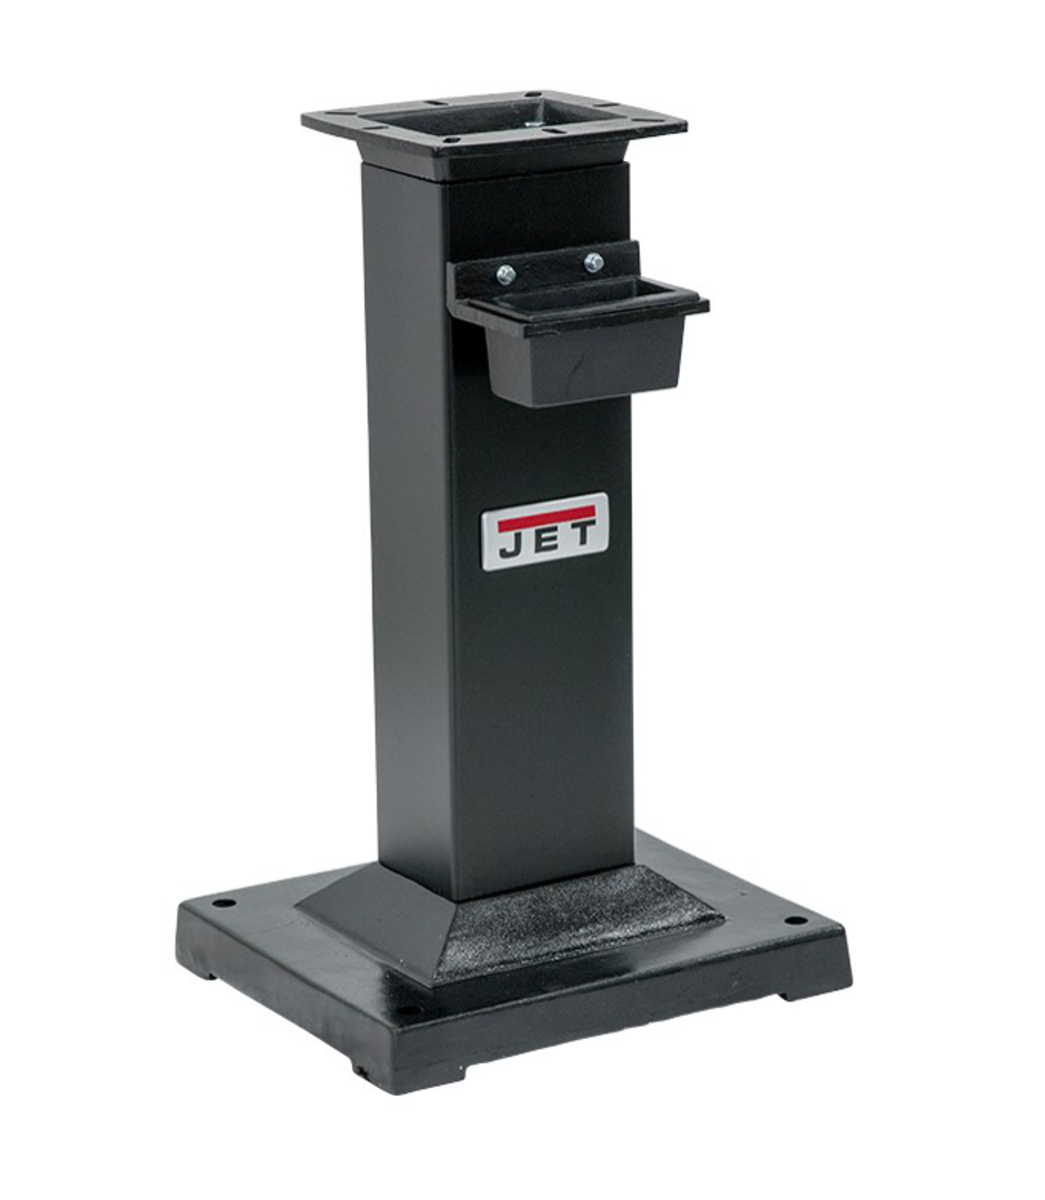 DBG-Stand for IBG-8", 10" & 12" Grinders